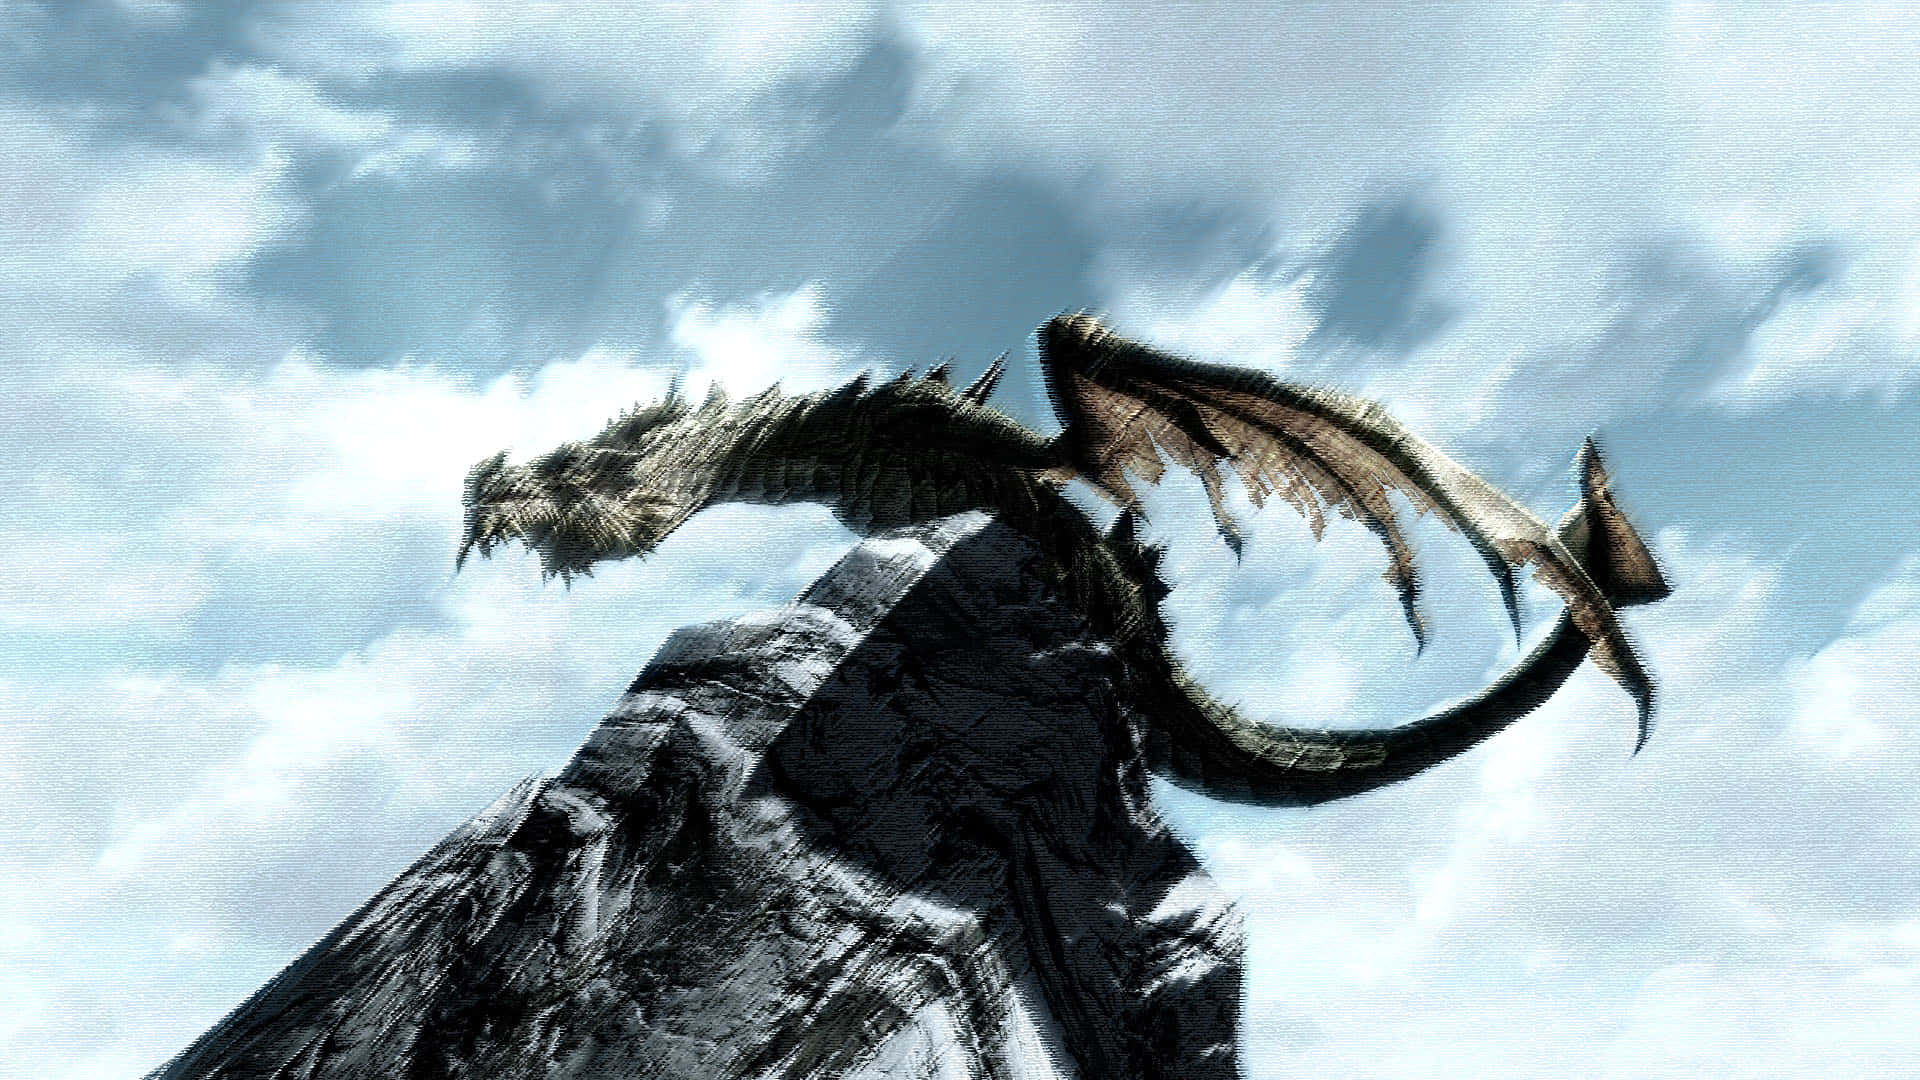 Paarthurnax perching high atop the Throat of the World in Skyrim Wallpaper